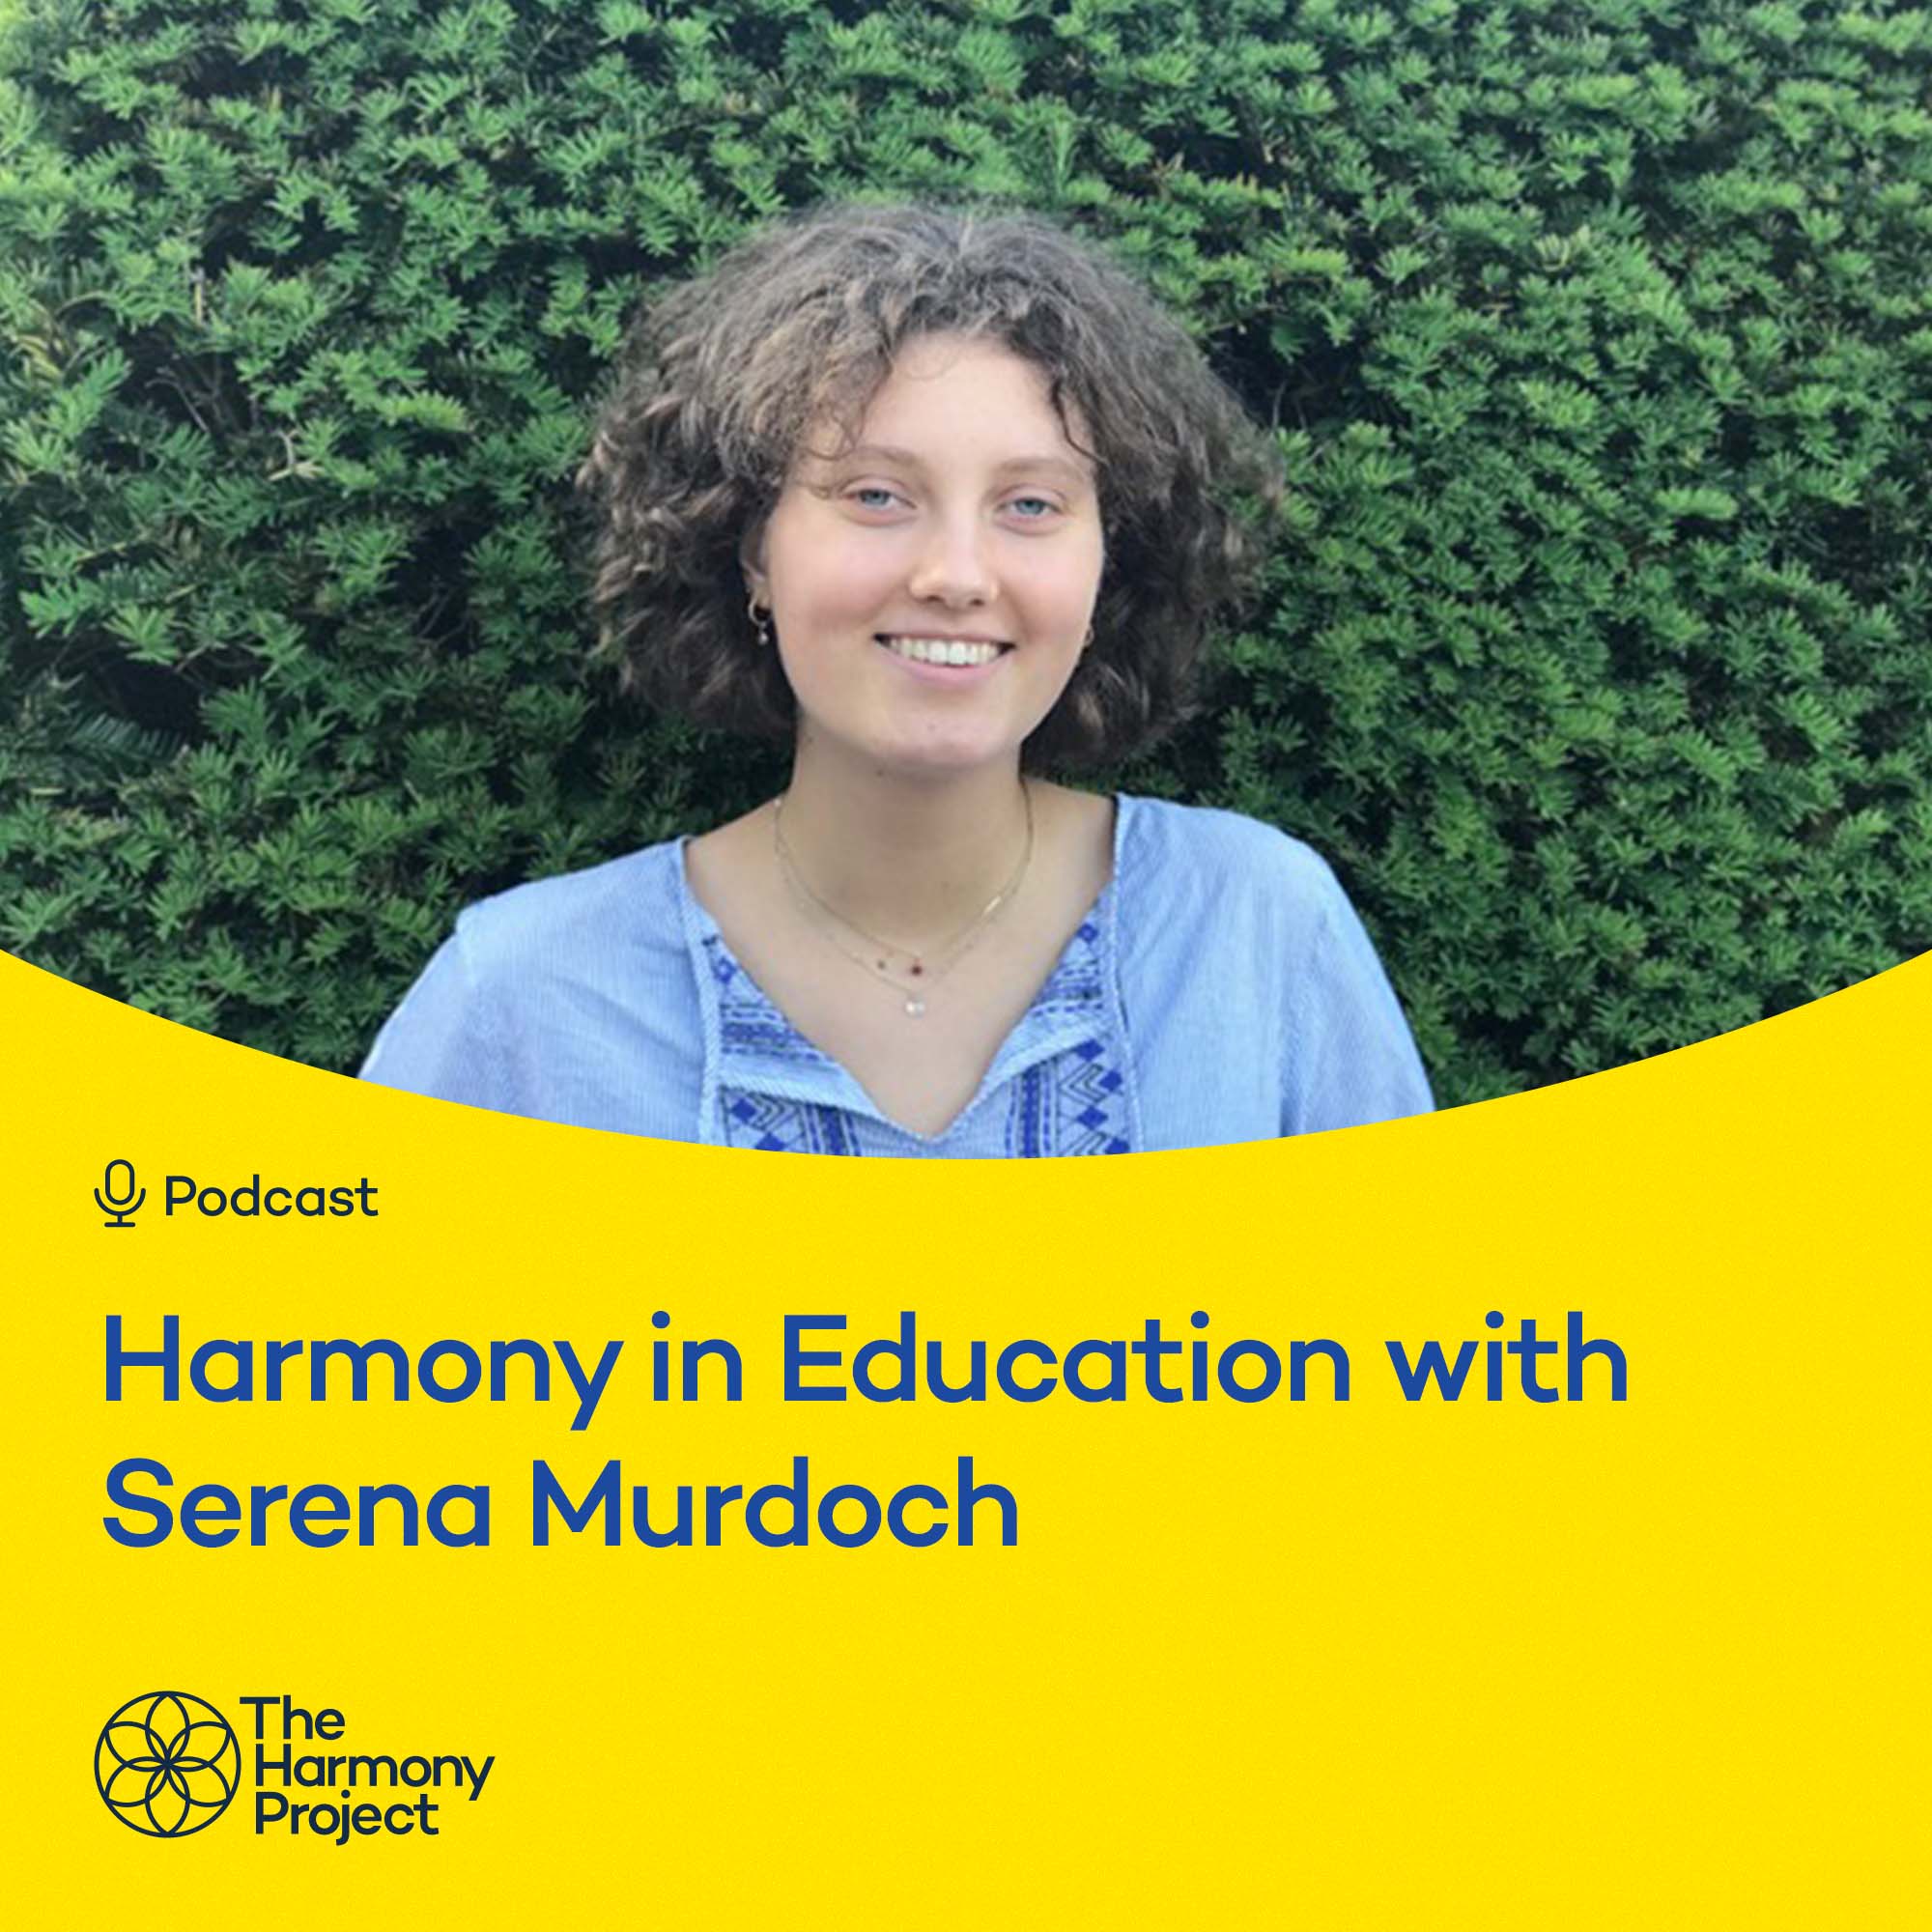 Harmony in Education with Serena Murdoch